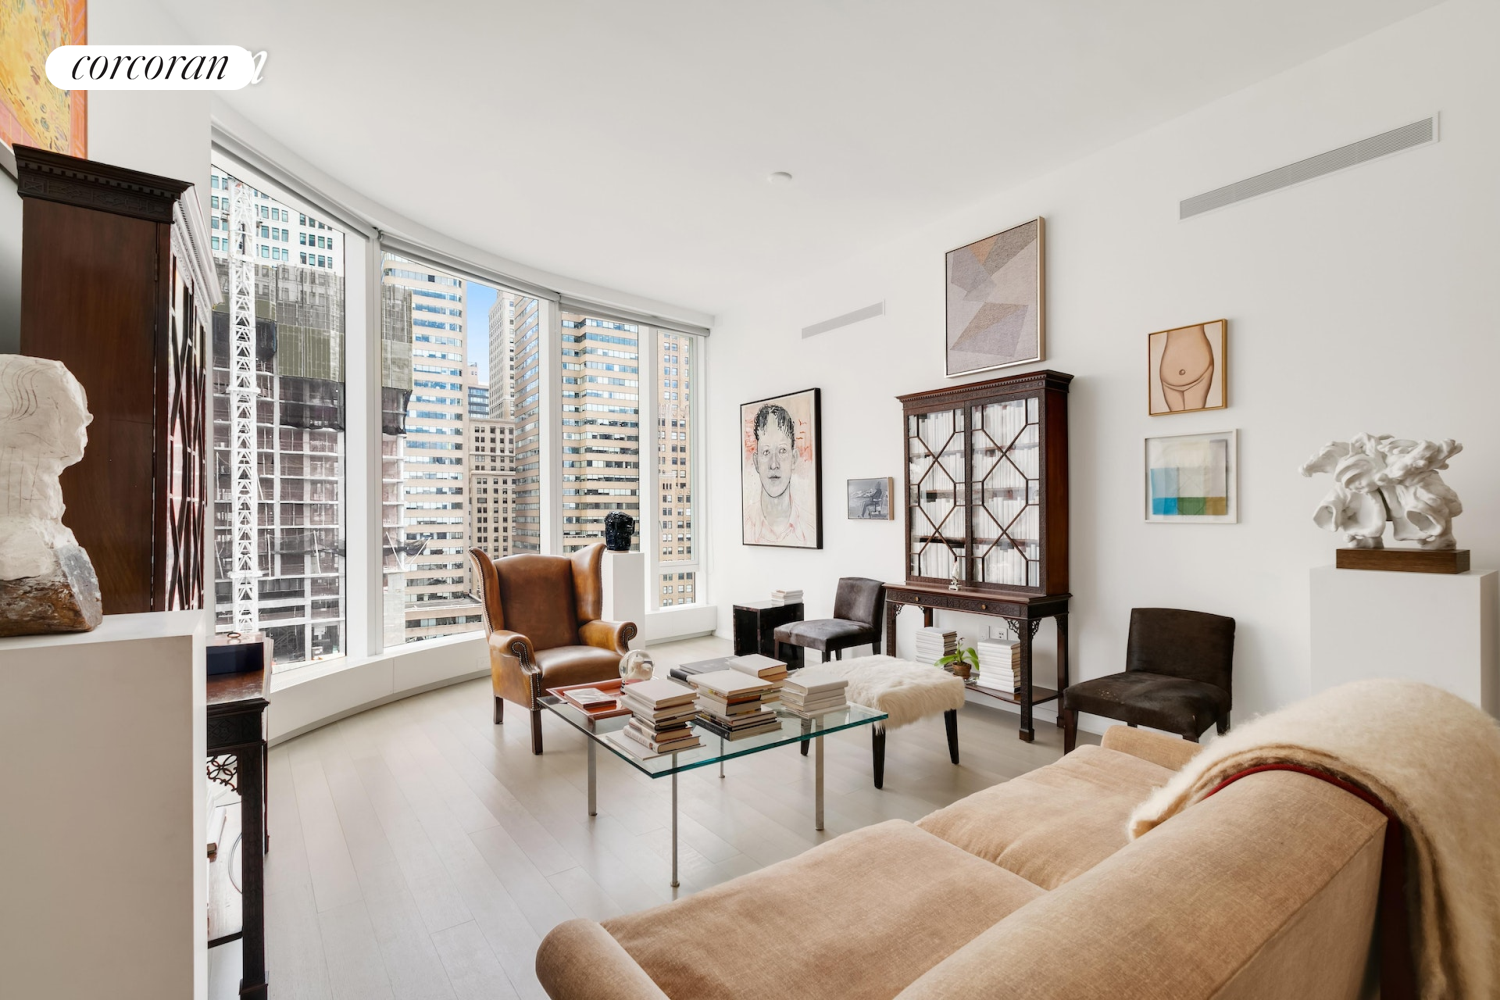 50 West Street 15A, Financial District, Downtown, NYC - 2 Bedrooms  
2.5 Bathrooms  
4 Rooms - 